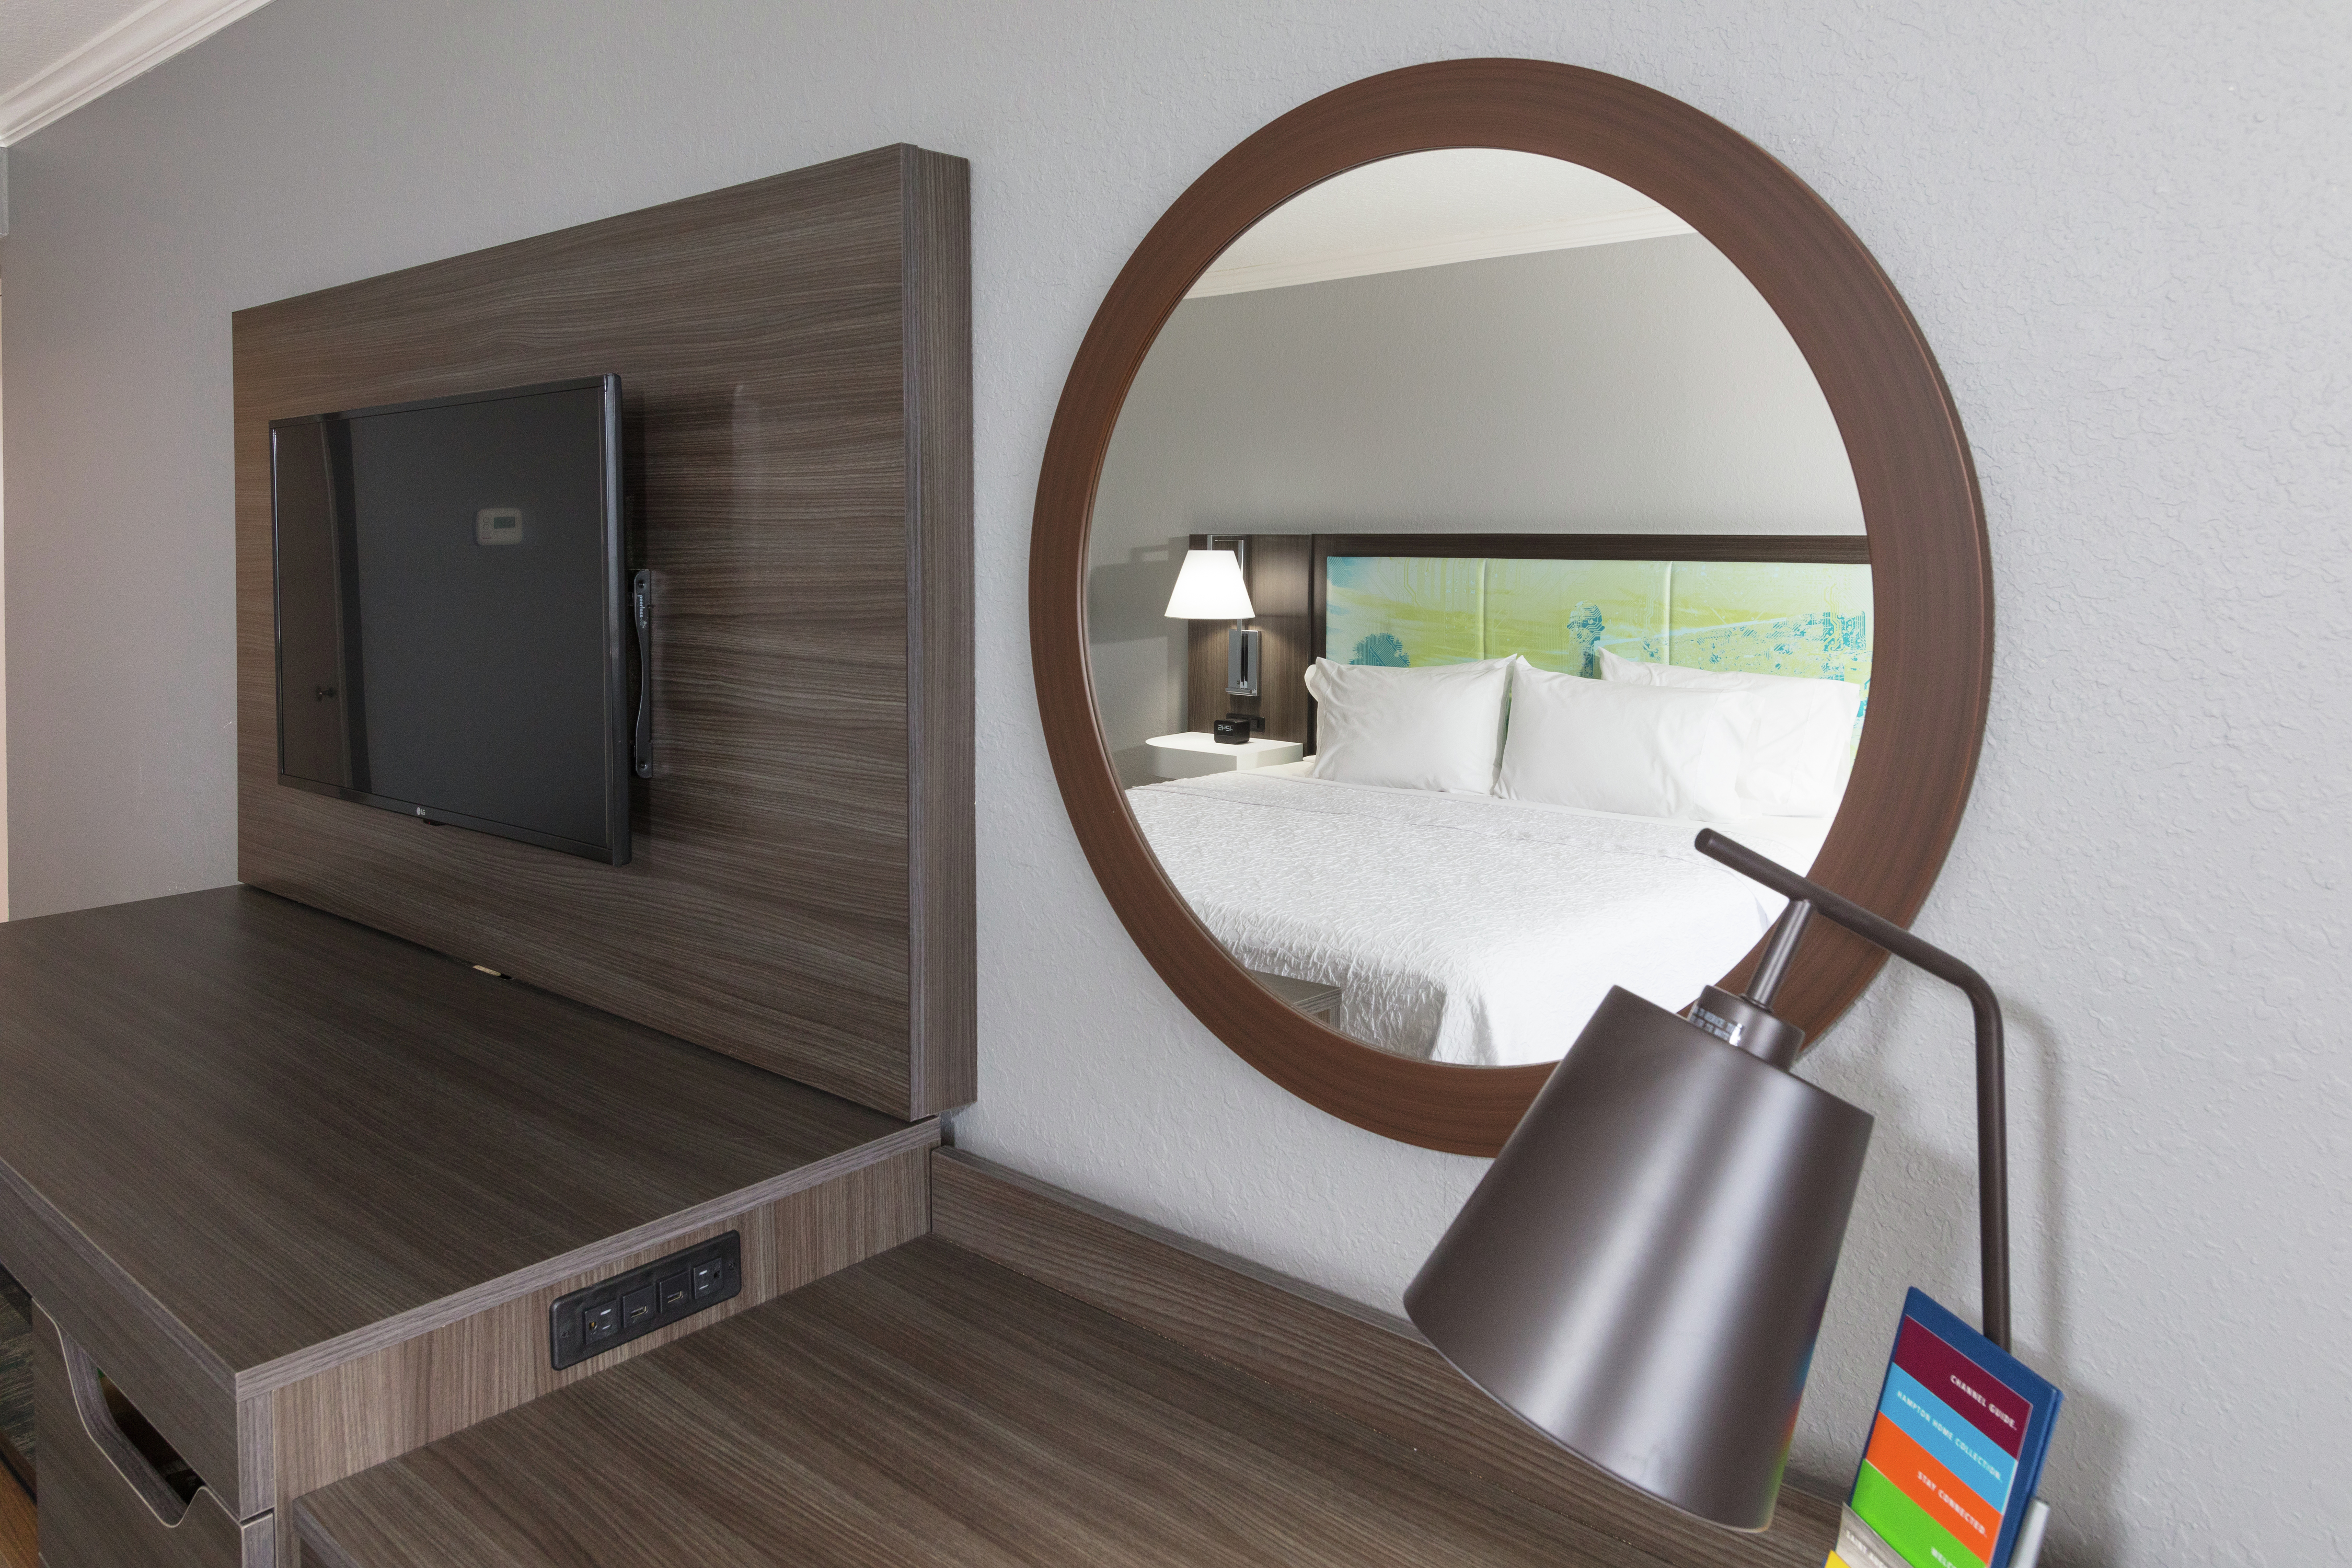 King Bed Reflected in Round Wall Mirror Above Work Desk in Guest Room with Wall-Mounted Flat Screen TV